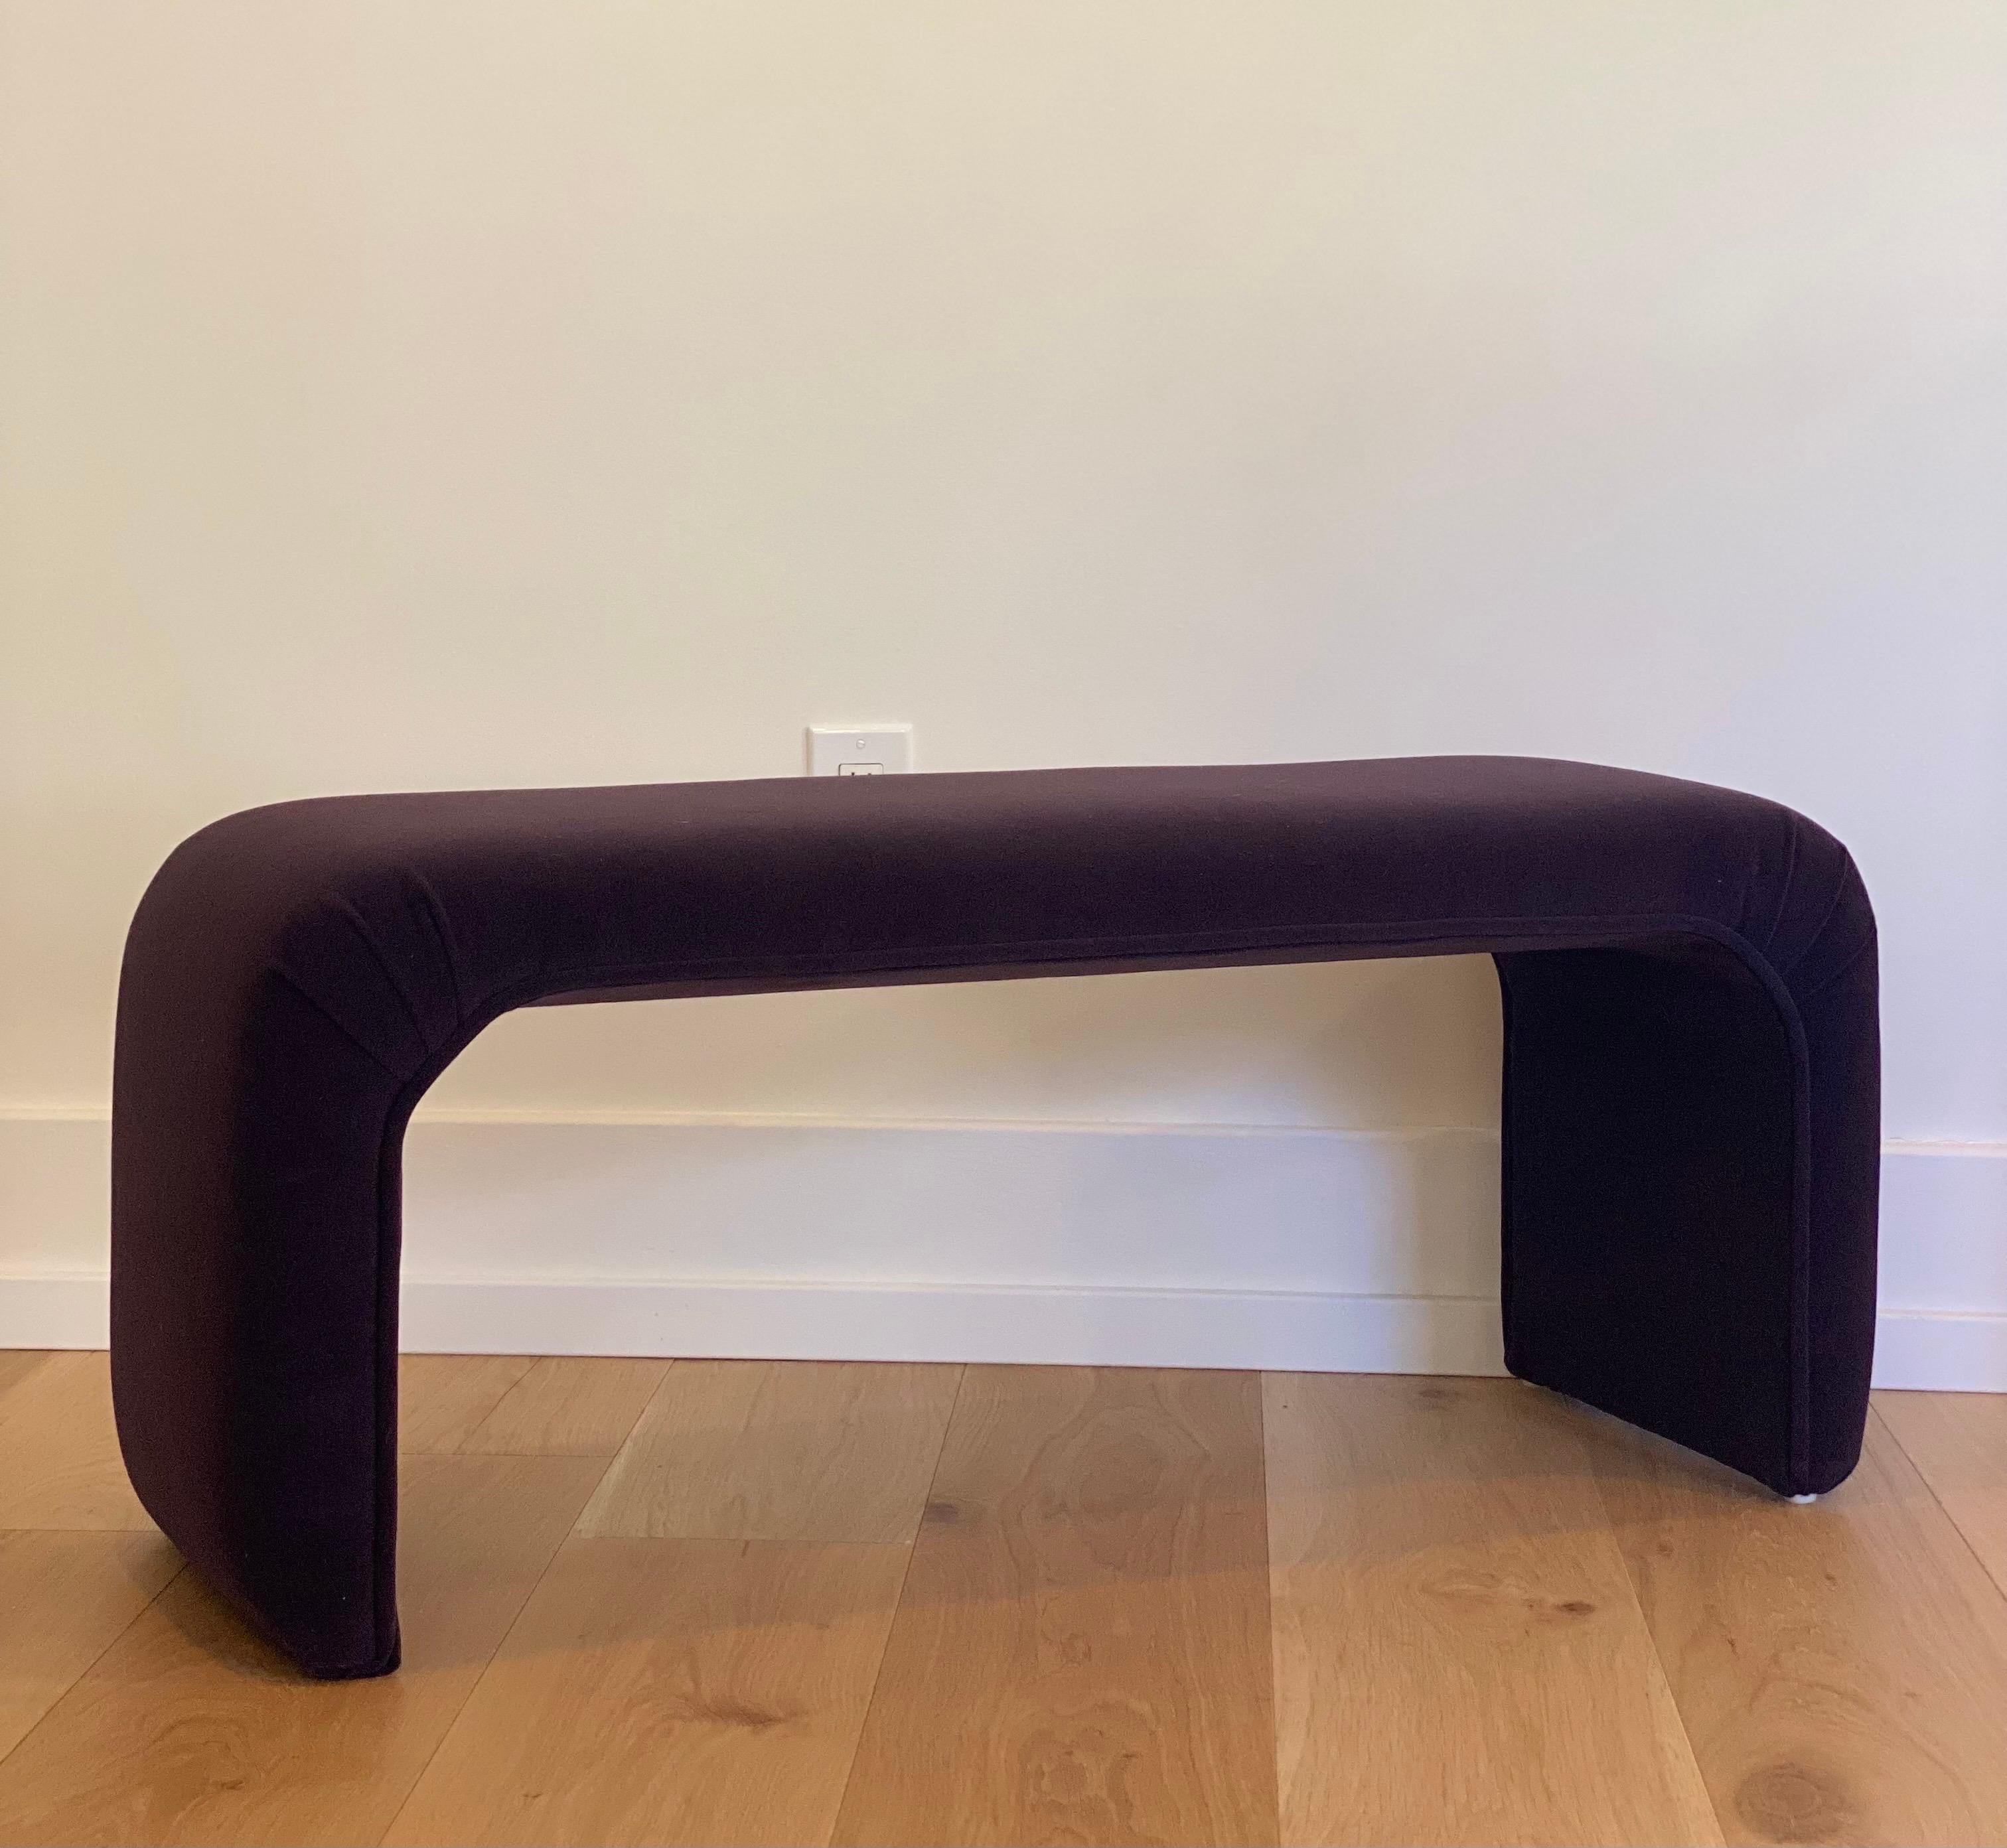 We are very pleased to offer a fabulous, Mid-Century Modern, upholstered bench in the manner of Karl Springer, circa the 1980s. Layer a space or add extra seating with this eye-catching bench wrapped in a new dark purple raisin mohair fabric. In